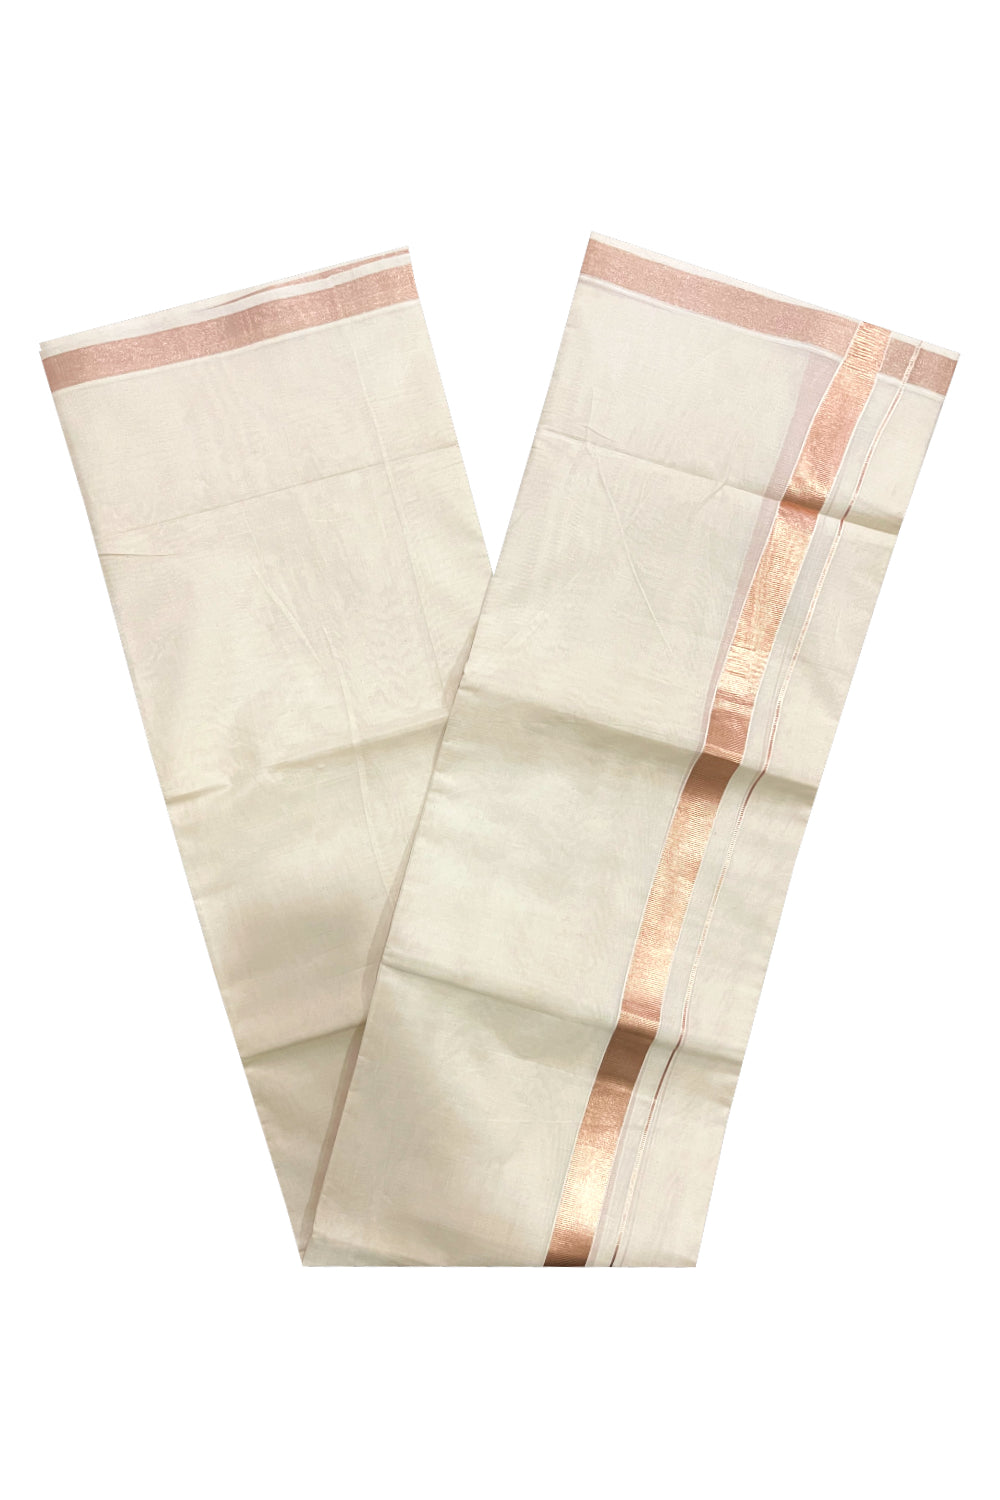 Off White Pure Cotton Double Mundu with 1 inch Rose Copper Kasavu Bord –  Southloom Handmade and Organics